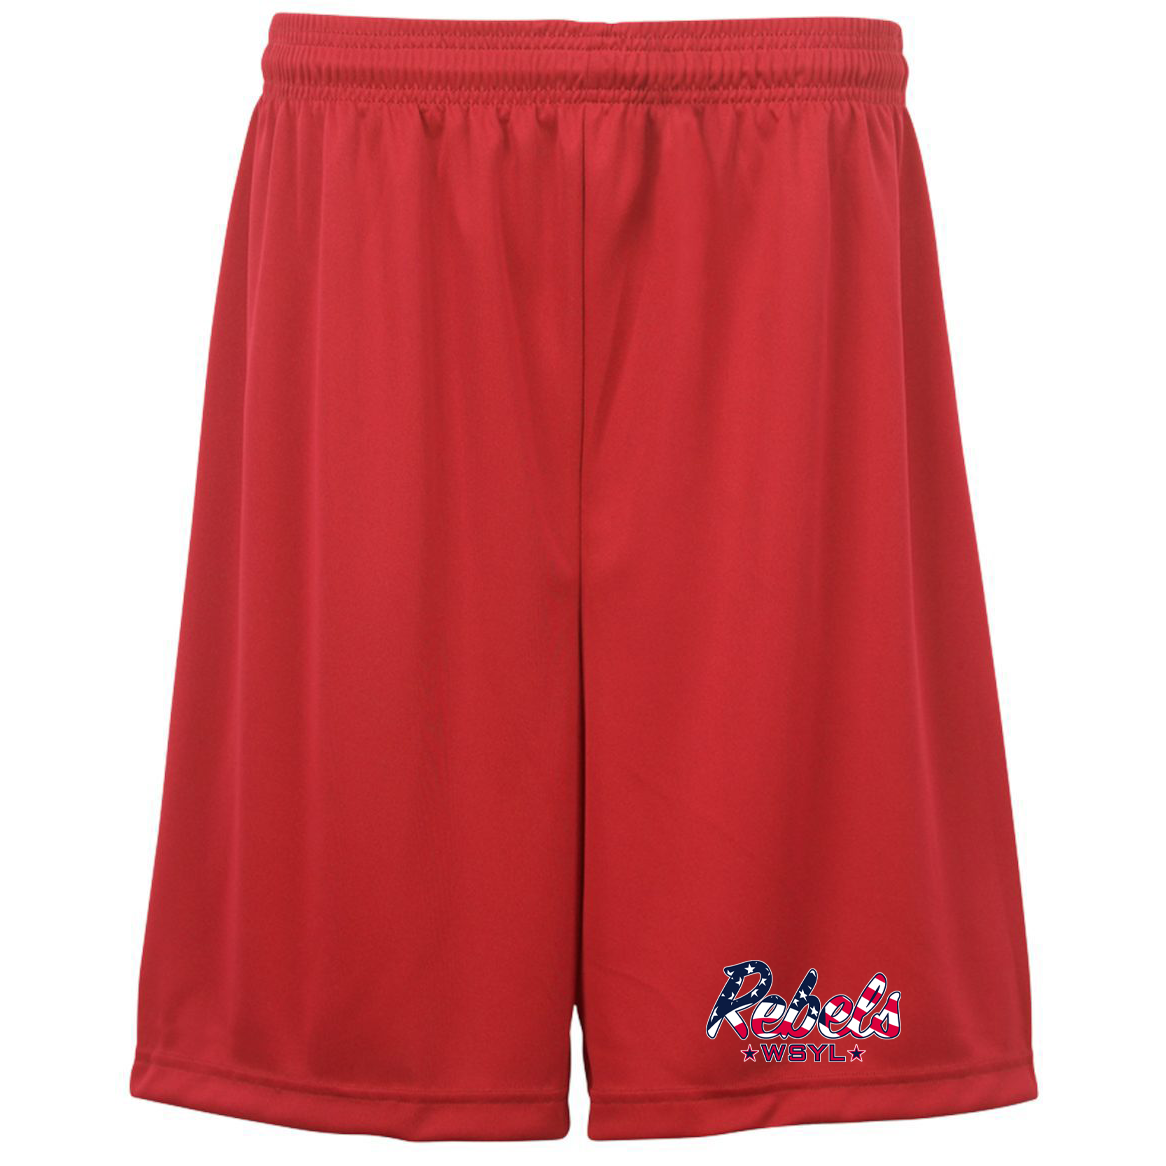 Rebels World Series Youth League Shorts